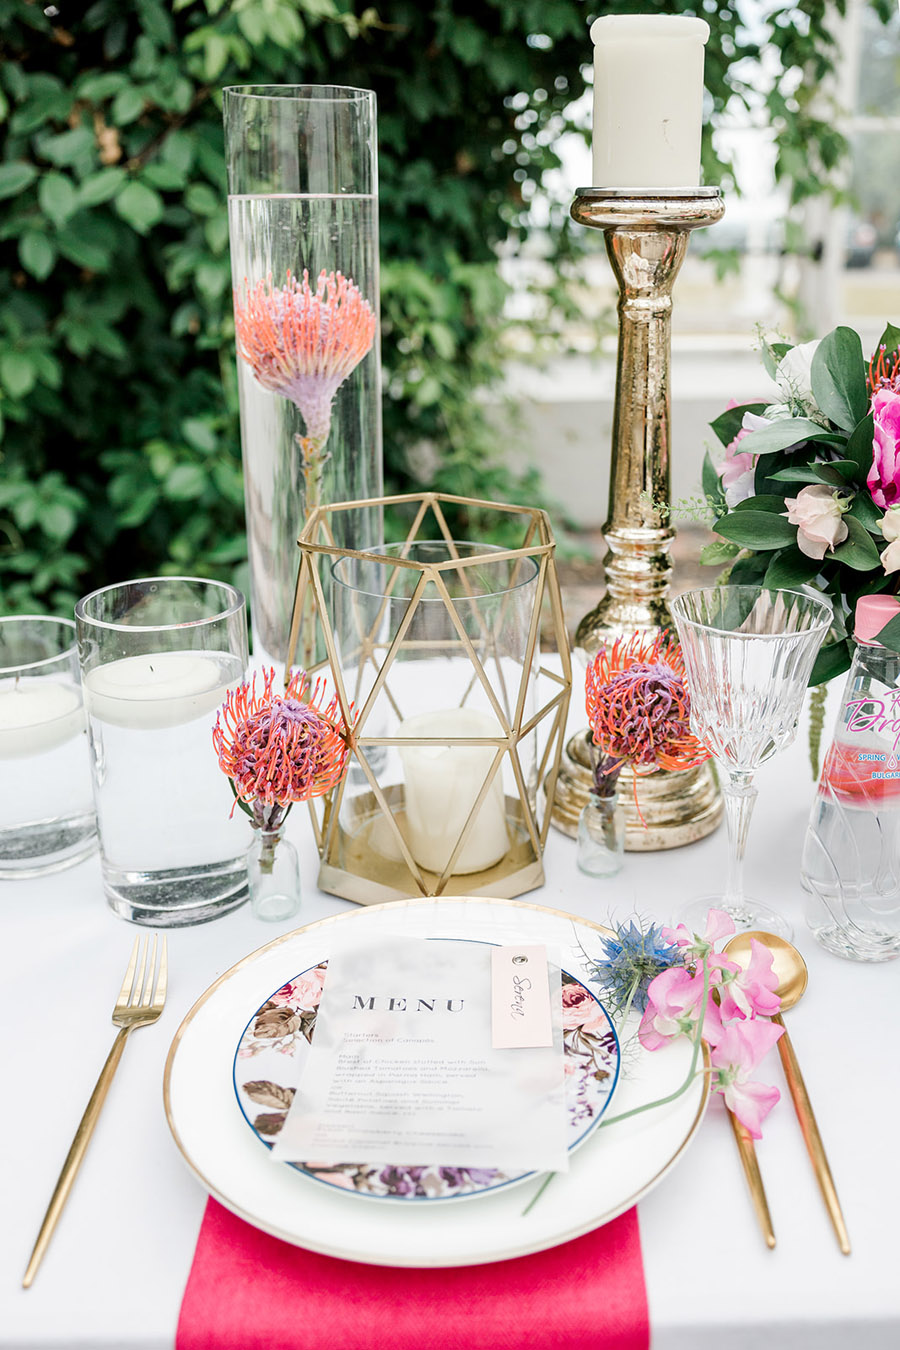 Modern intimate wedding styling inspiration from Slindon House, image credit Kelsie Scully (11)